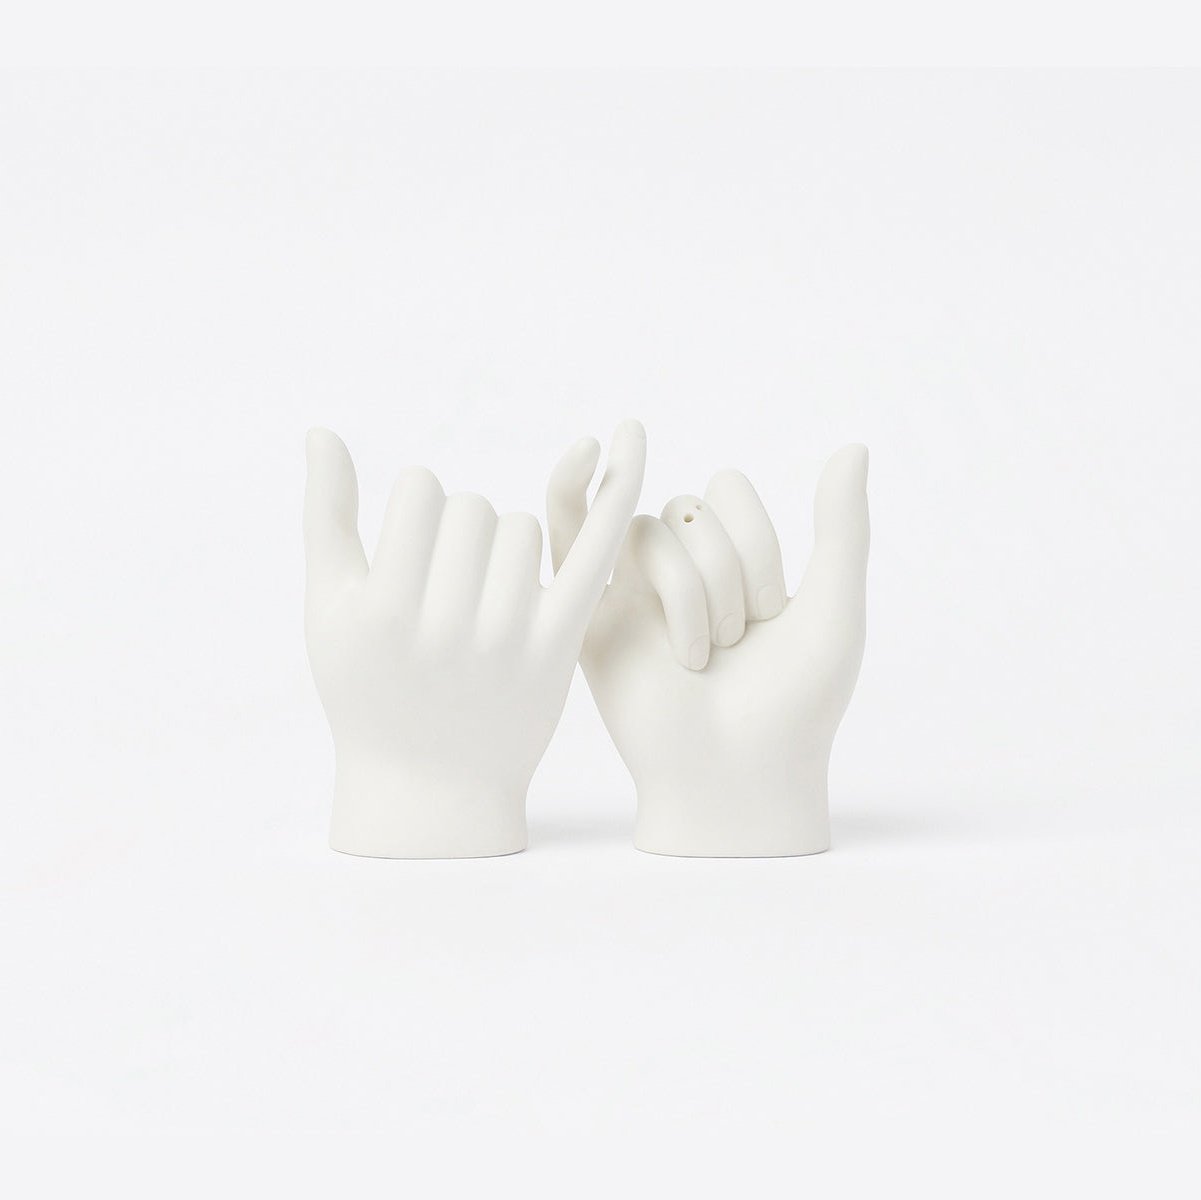 Pinky Swear Salt and Pepper Shakers